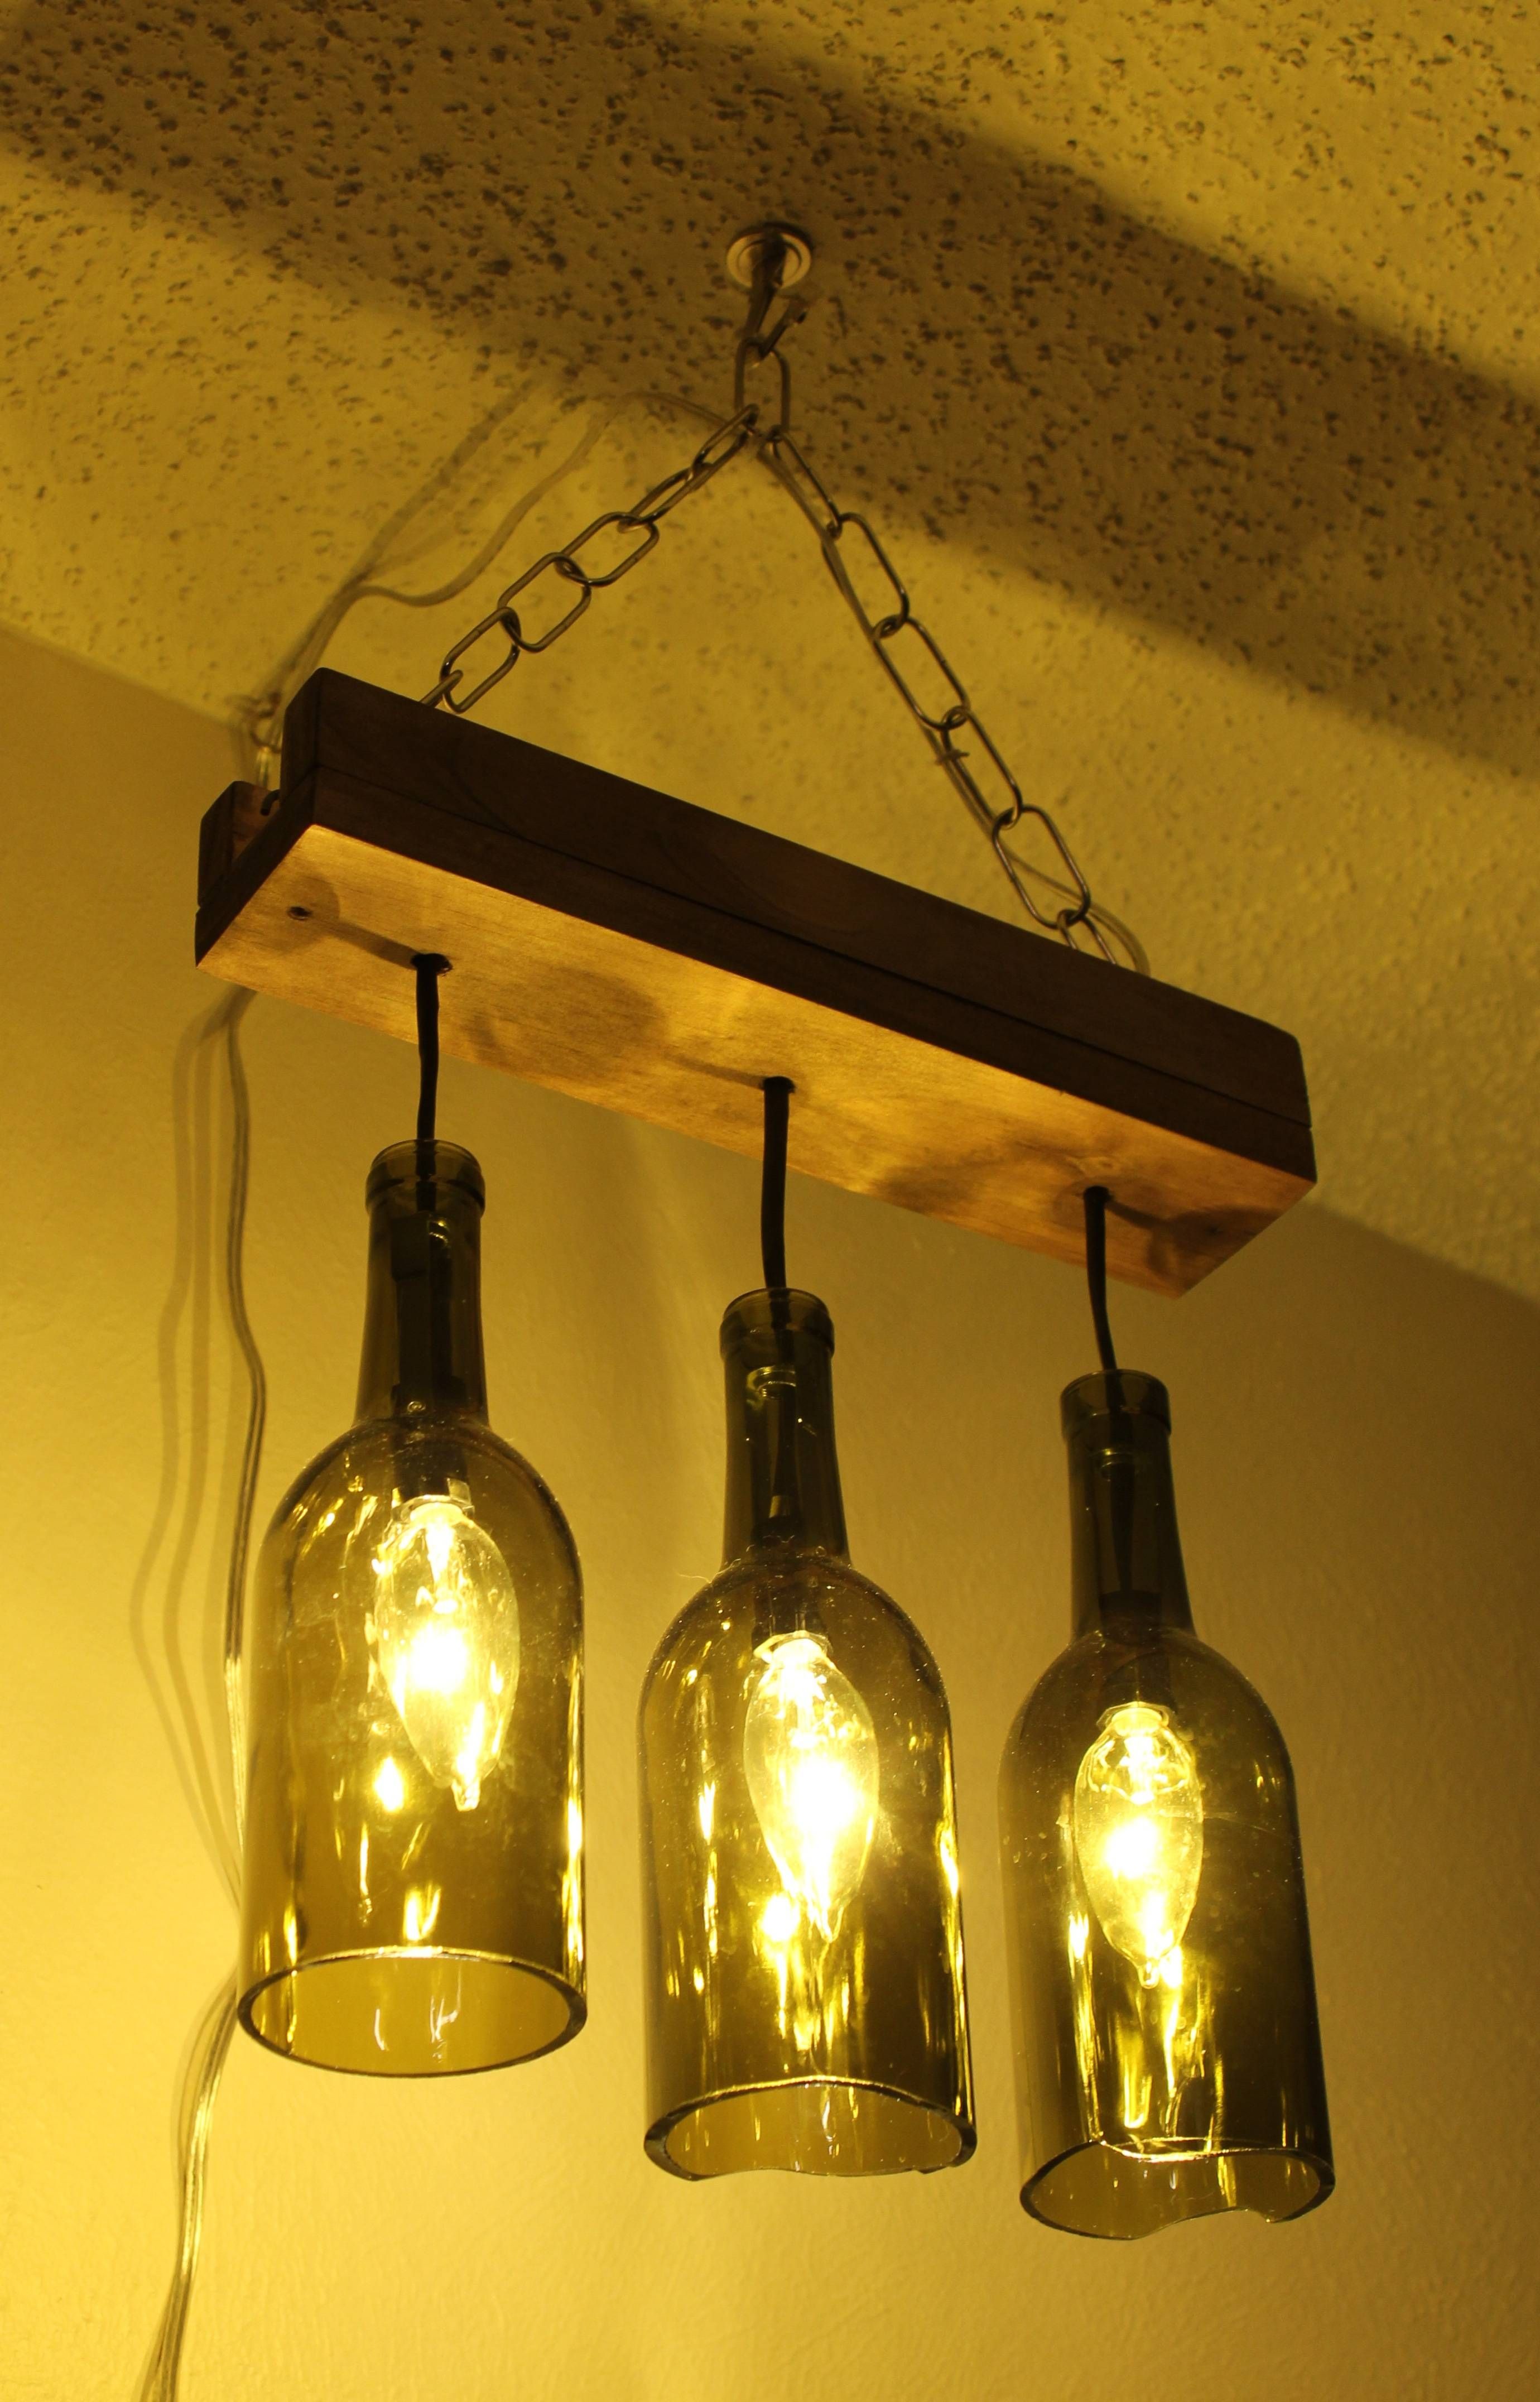 3 Wine Bottle Pendant Lamp Design Come With Rectangular Wooden Pertaining To Wine Pendant Lights (View 9 of 15)